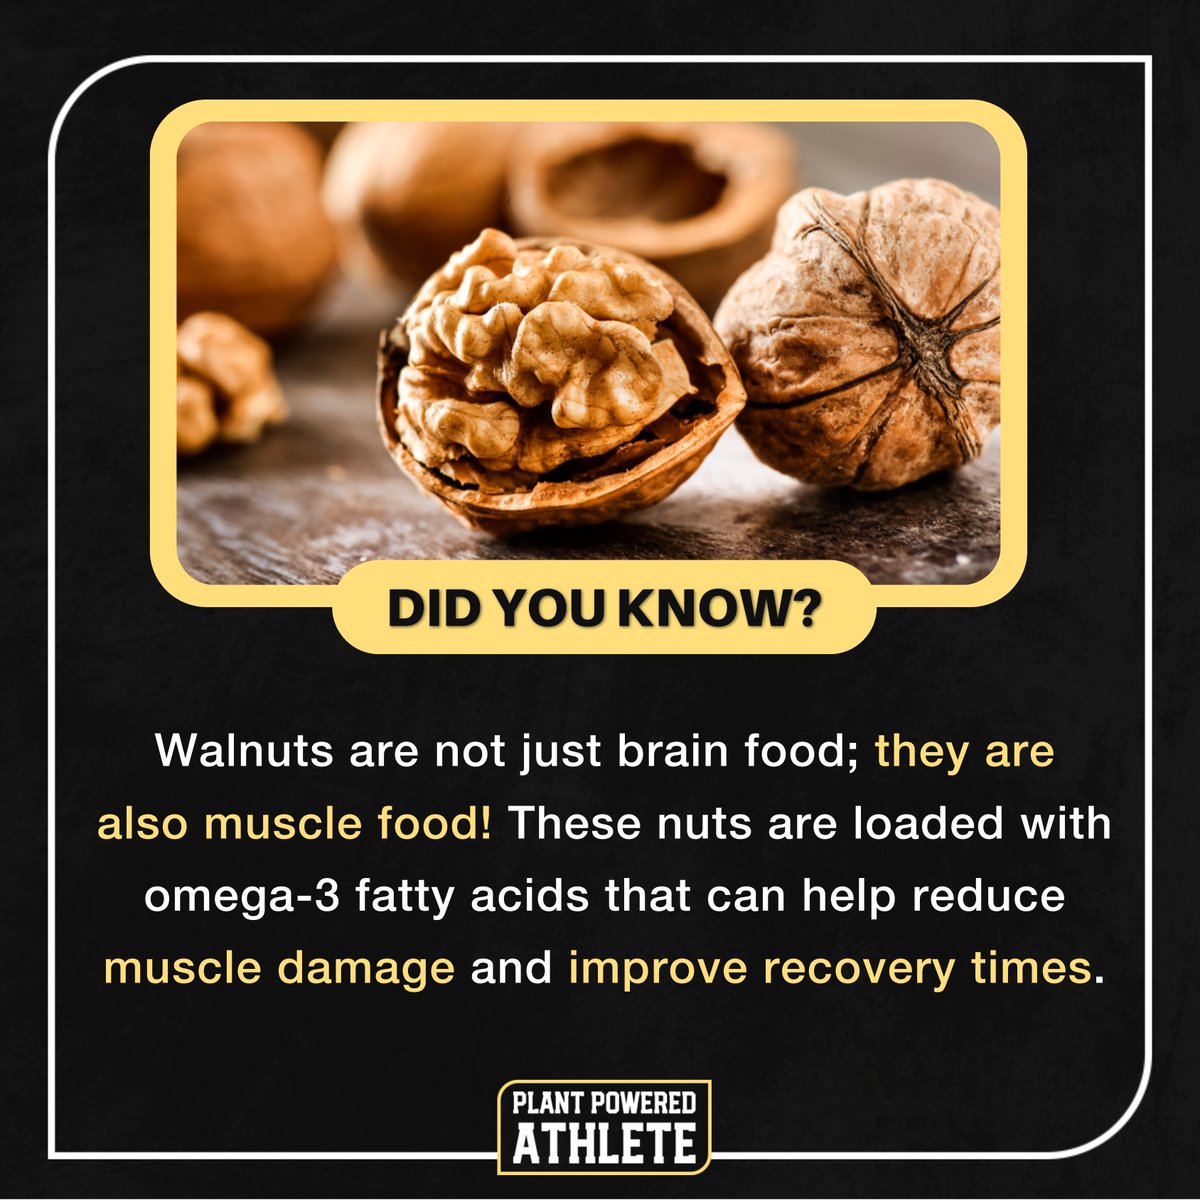 Go nuts for recovery! 🌰💪 

Walnuts pack a punch with omega-3s to mend muscles and speed up recovery.

Snack smart, recover faster, and fuel your athletic journey the plant-powered way.

#plantpoweredathlete #plantbasedprotein #plantbasedcoach #plantpowered #plantbased #plan...